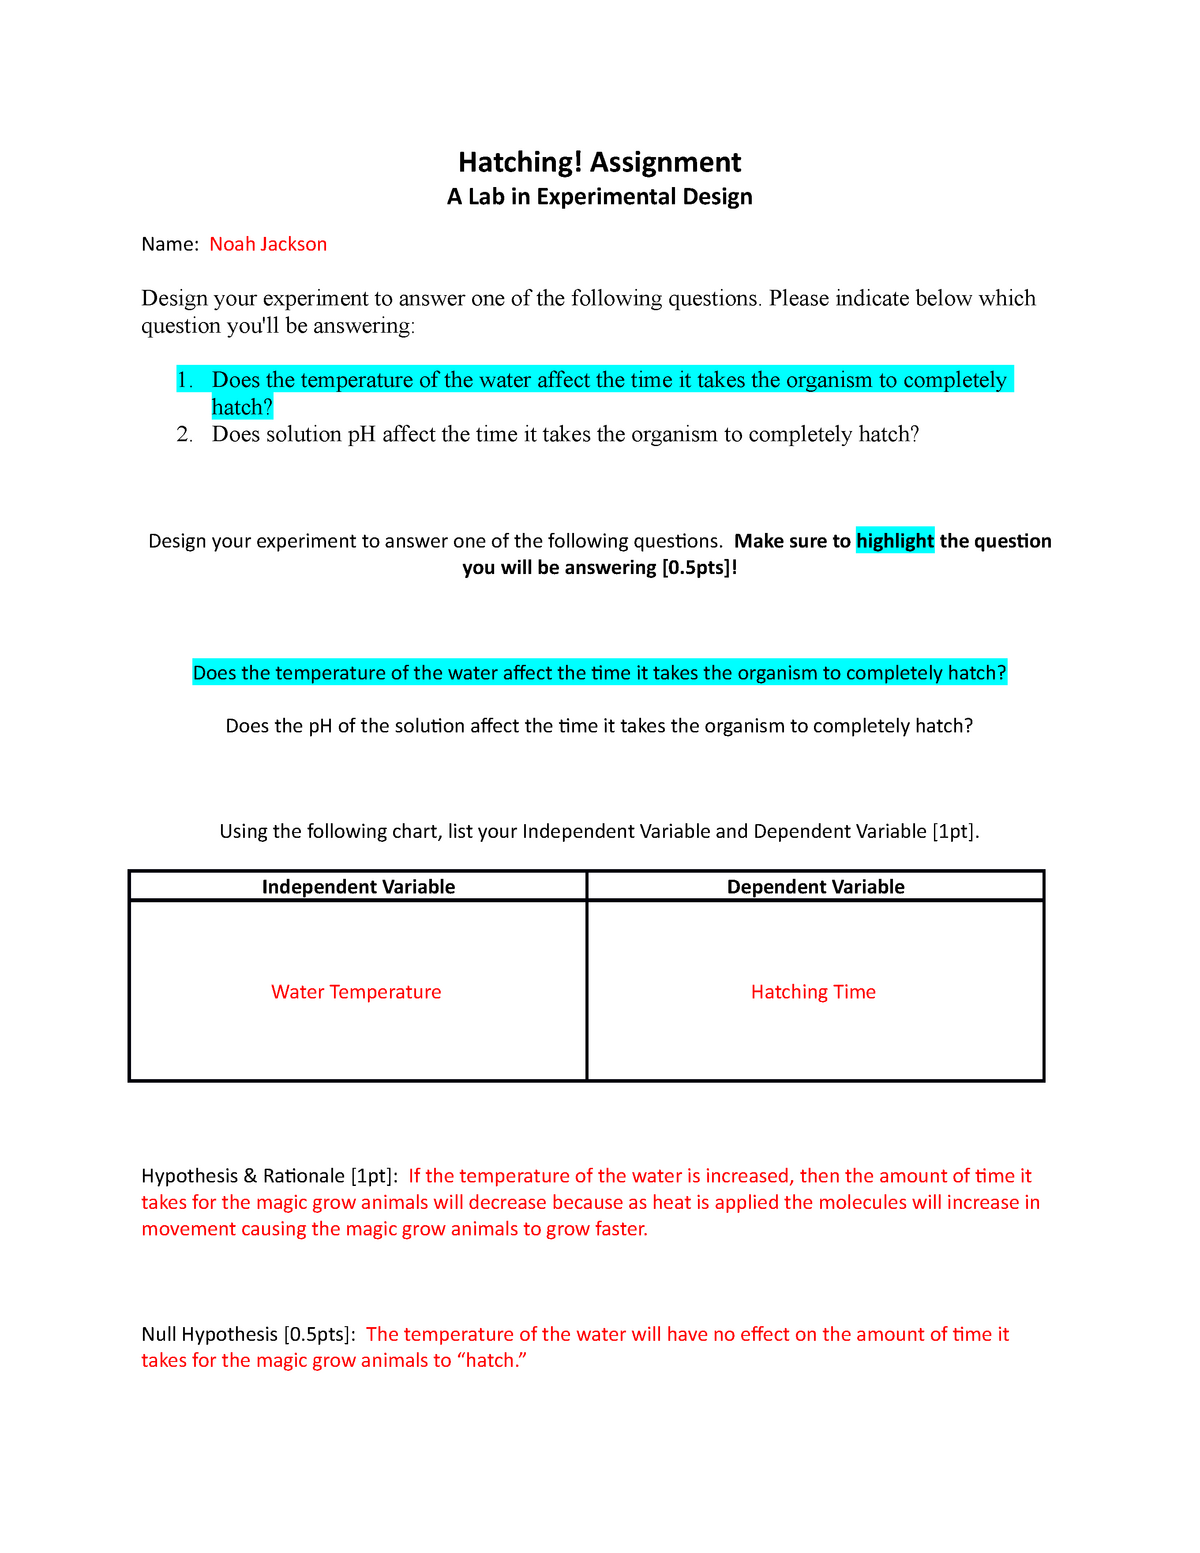 BIOL200 Lab20 - worksheet - Hatching! Assignment A Lab in Pertaining To Experimental Design Worksheet Answers